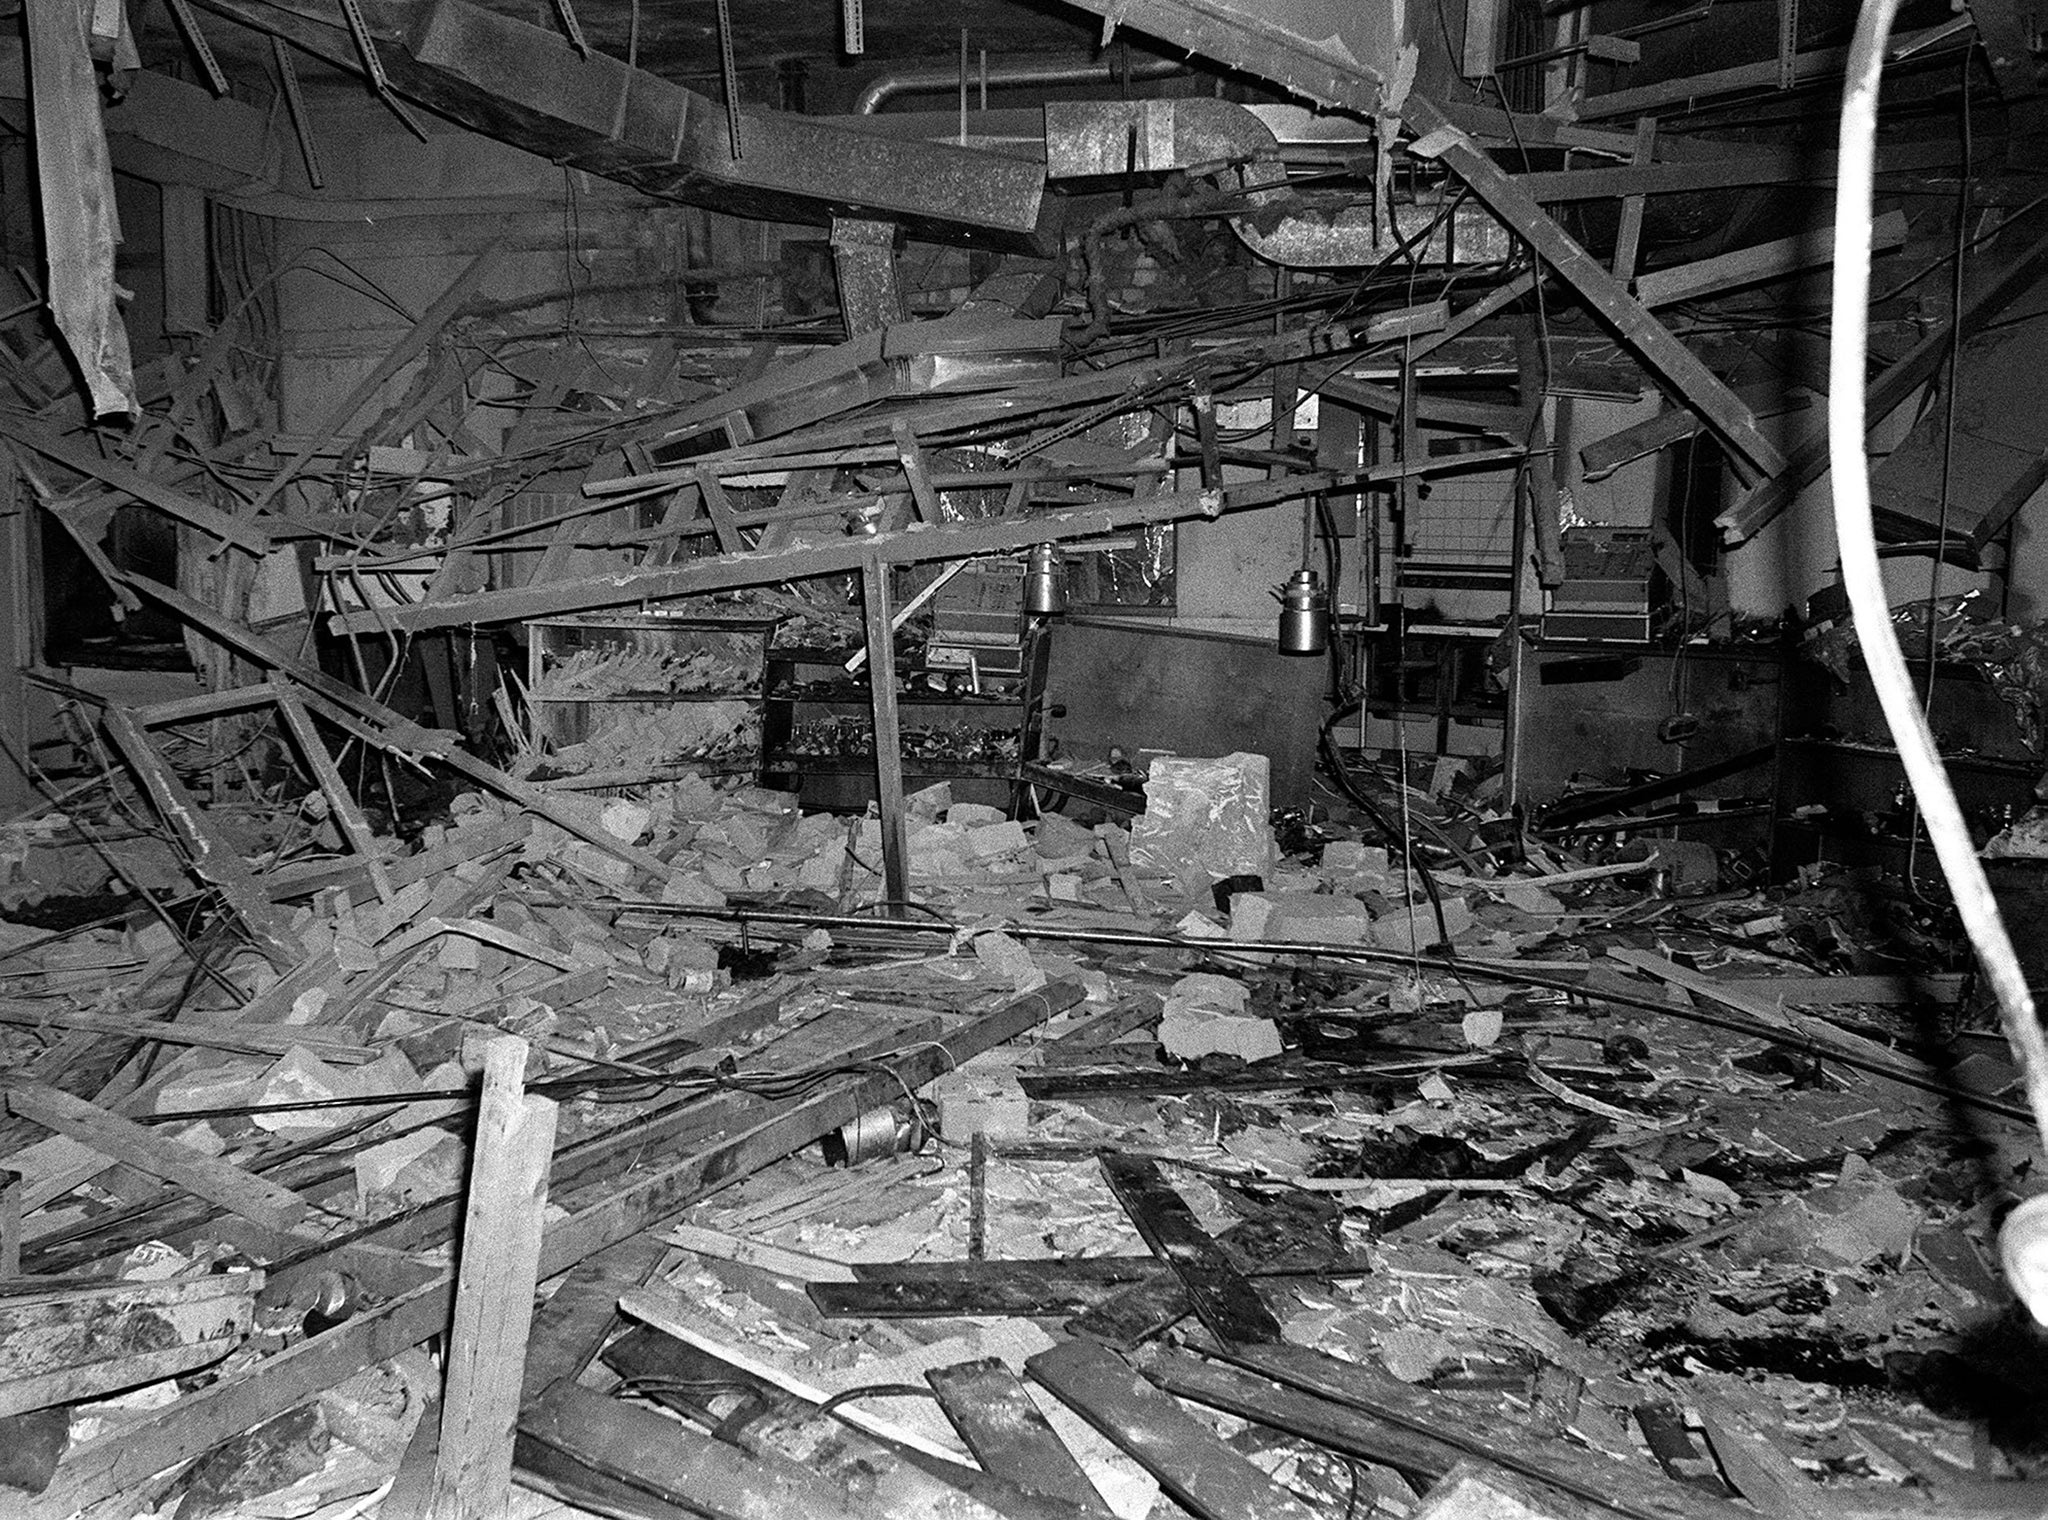 The wreckage left at the Mulberry Bush pub in Birmingham after a bomb exploded on 21 November 1974